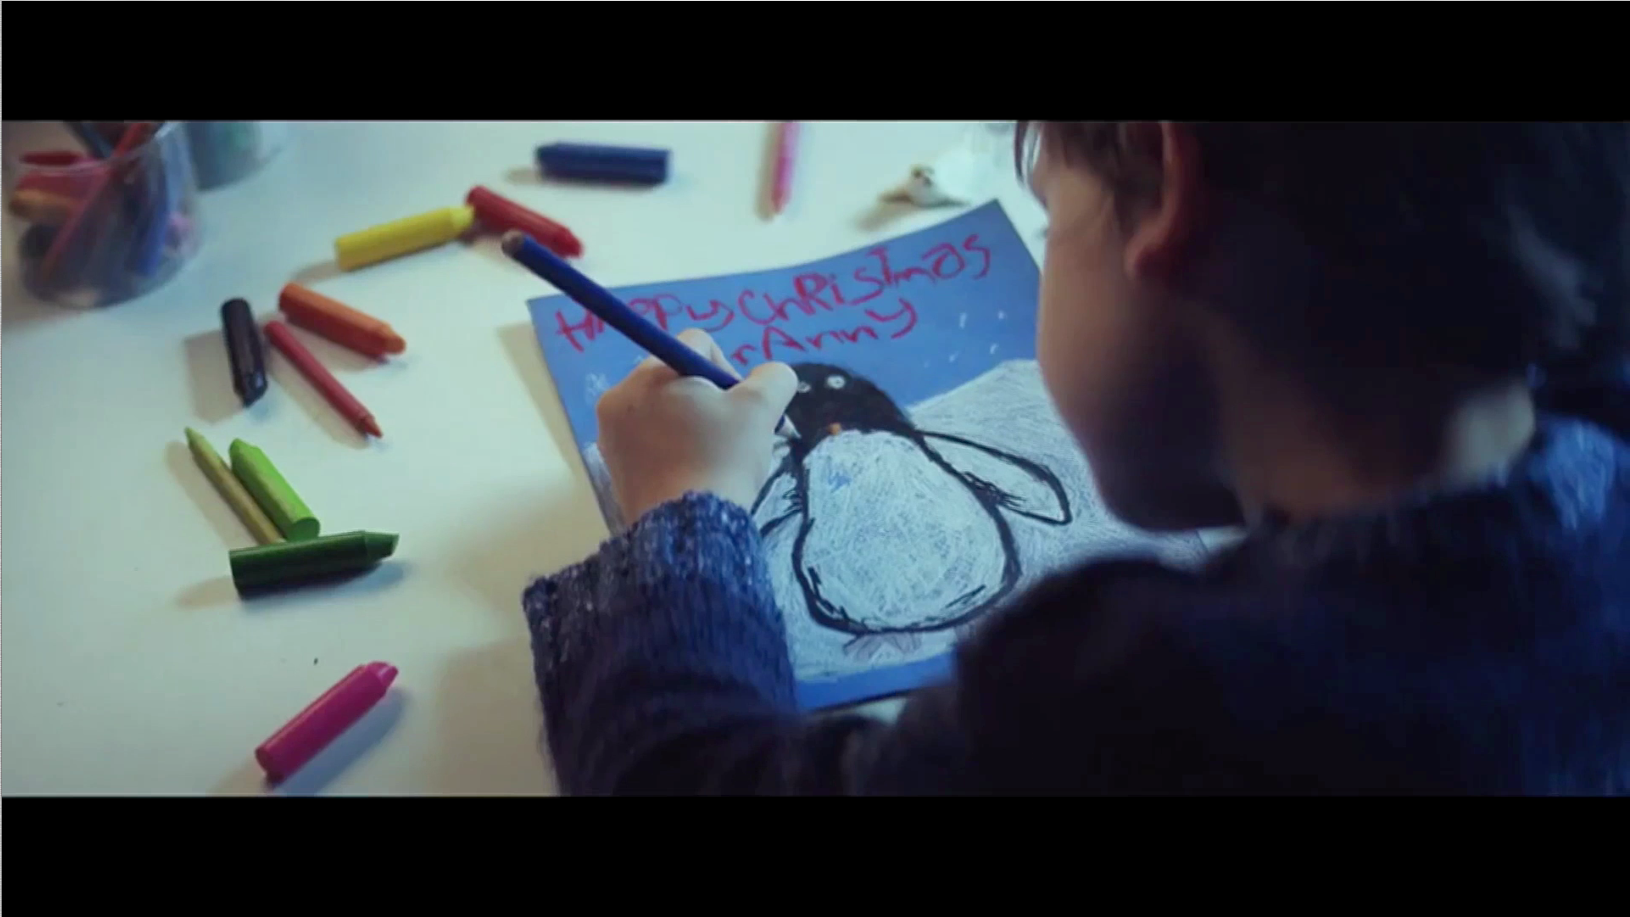 The main character of the advert draws Monty the Penguin